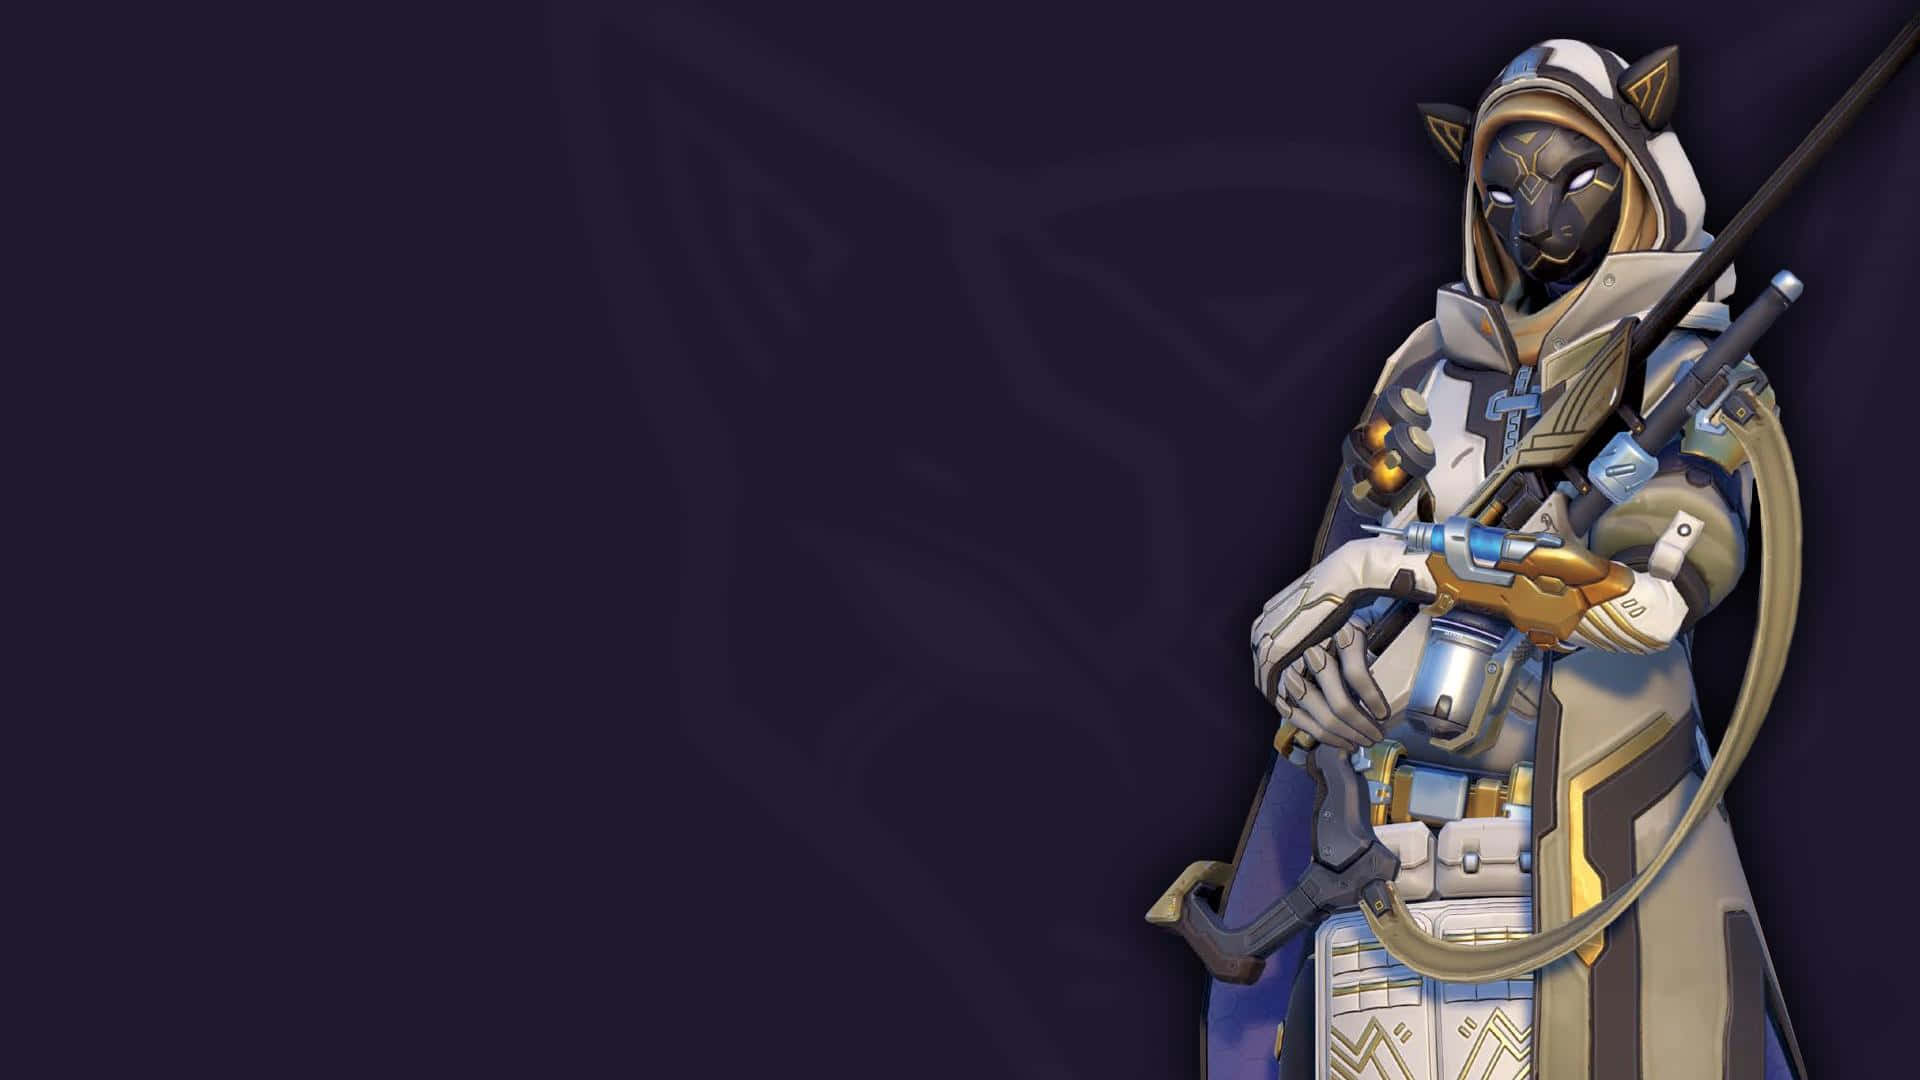 Legendary sniper Ana ready for action in Overwatch Wallpaper